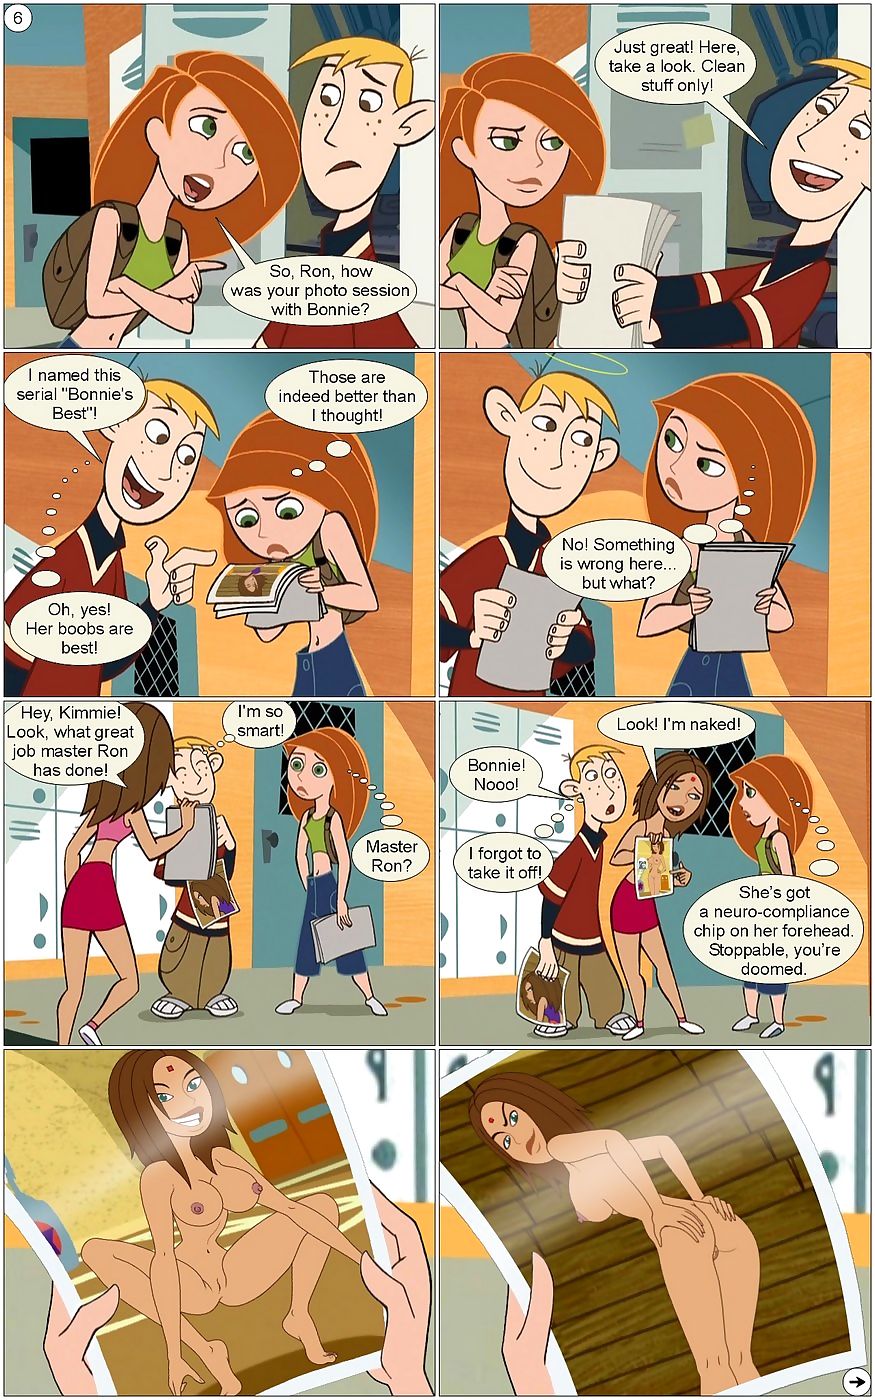 Kim Possible- Photography Class page 1